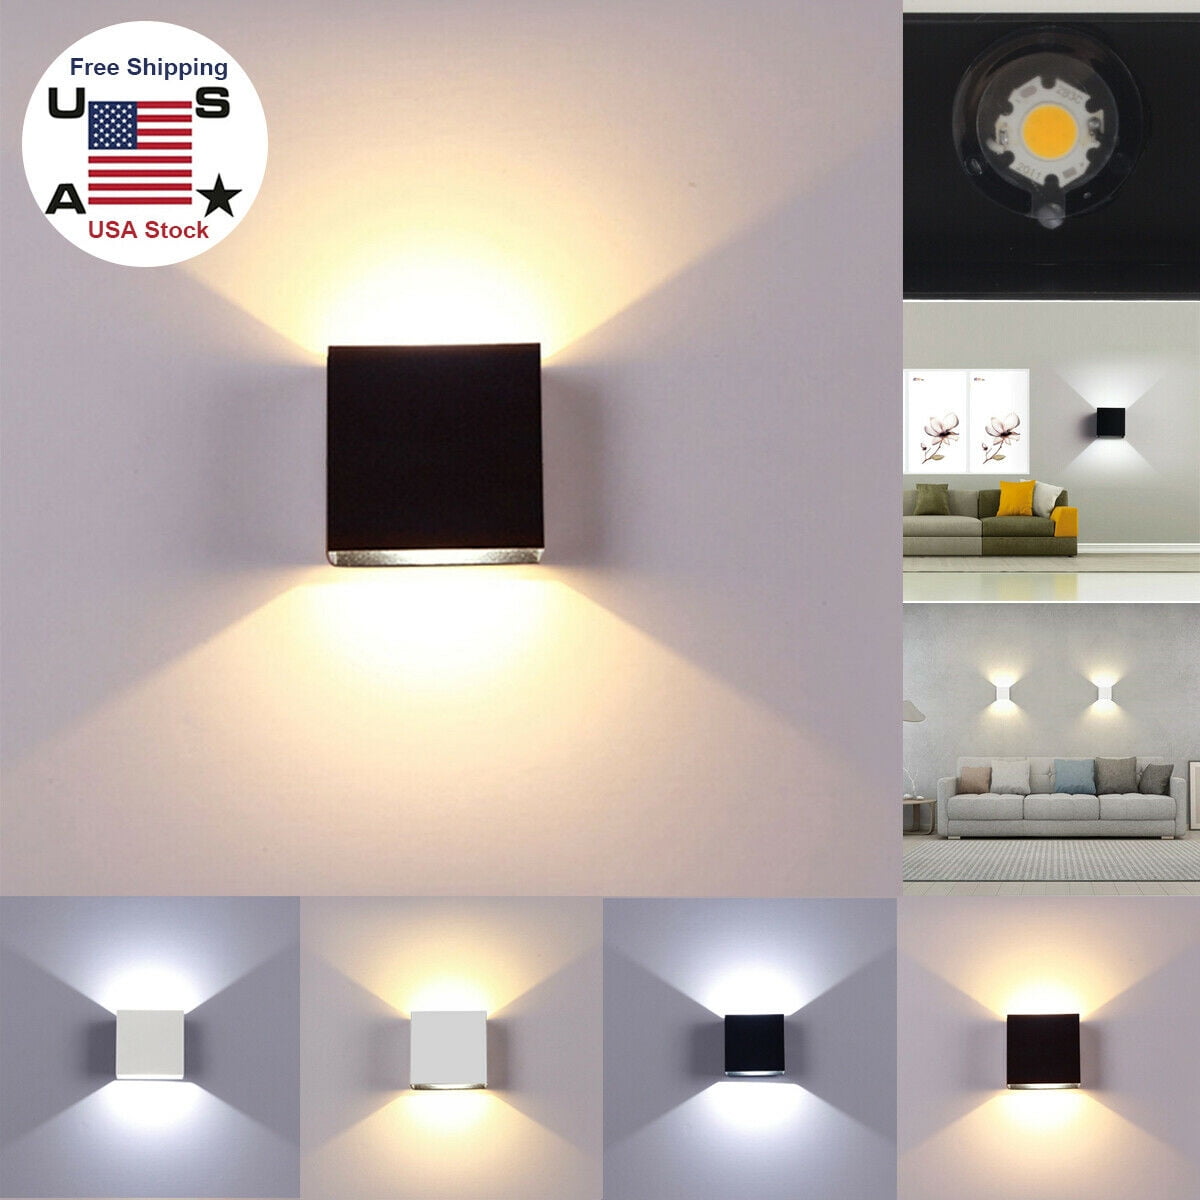 Dimmable/N 3W LED Wall Sconces Fixture Lamp Picture Spot Light Living Room Hotel 